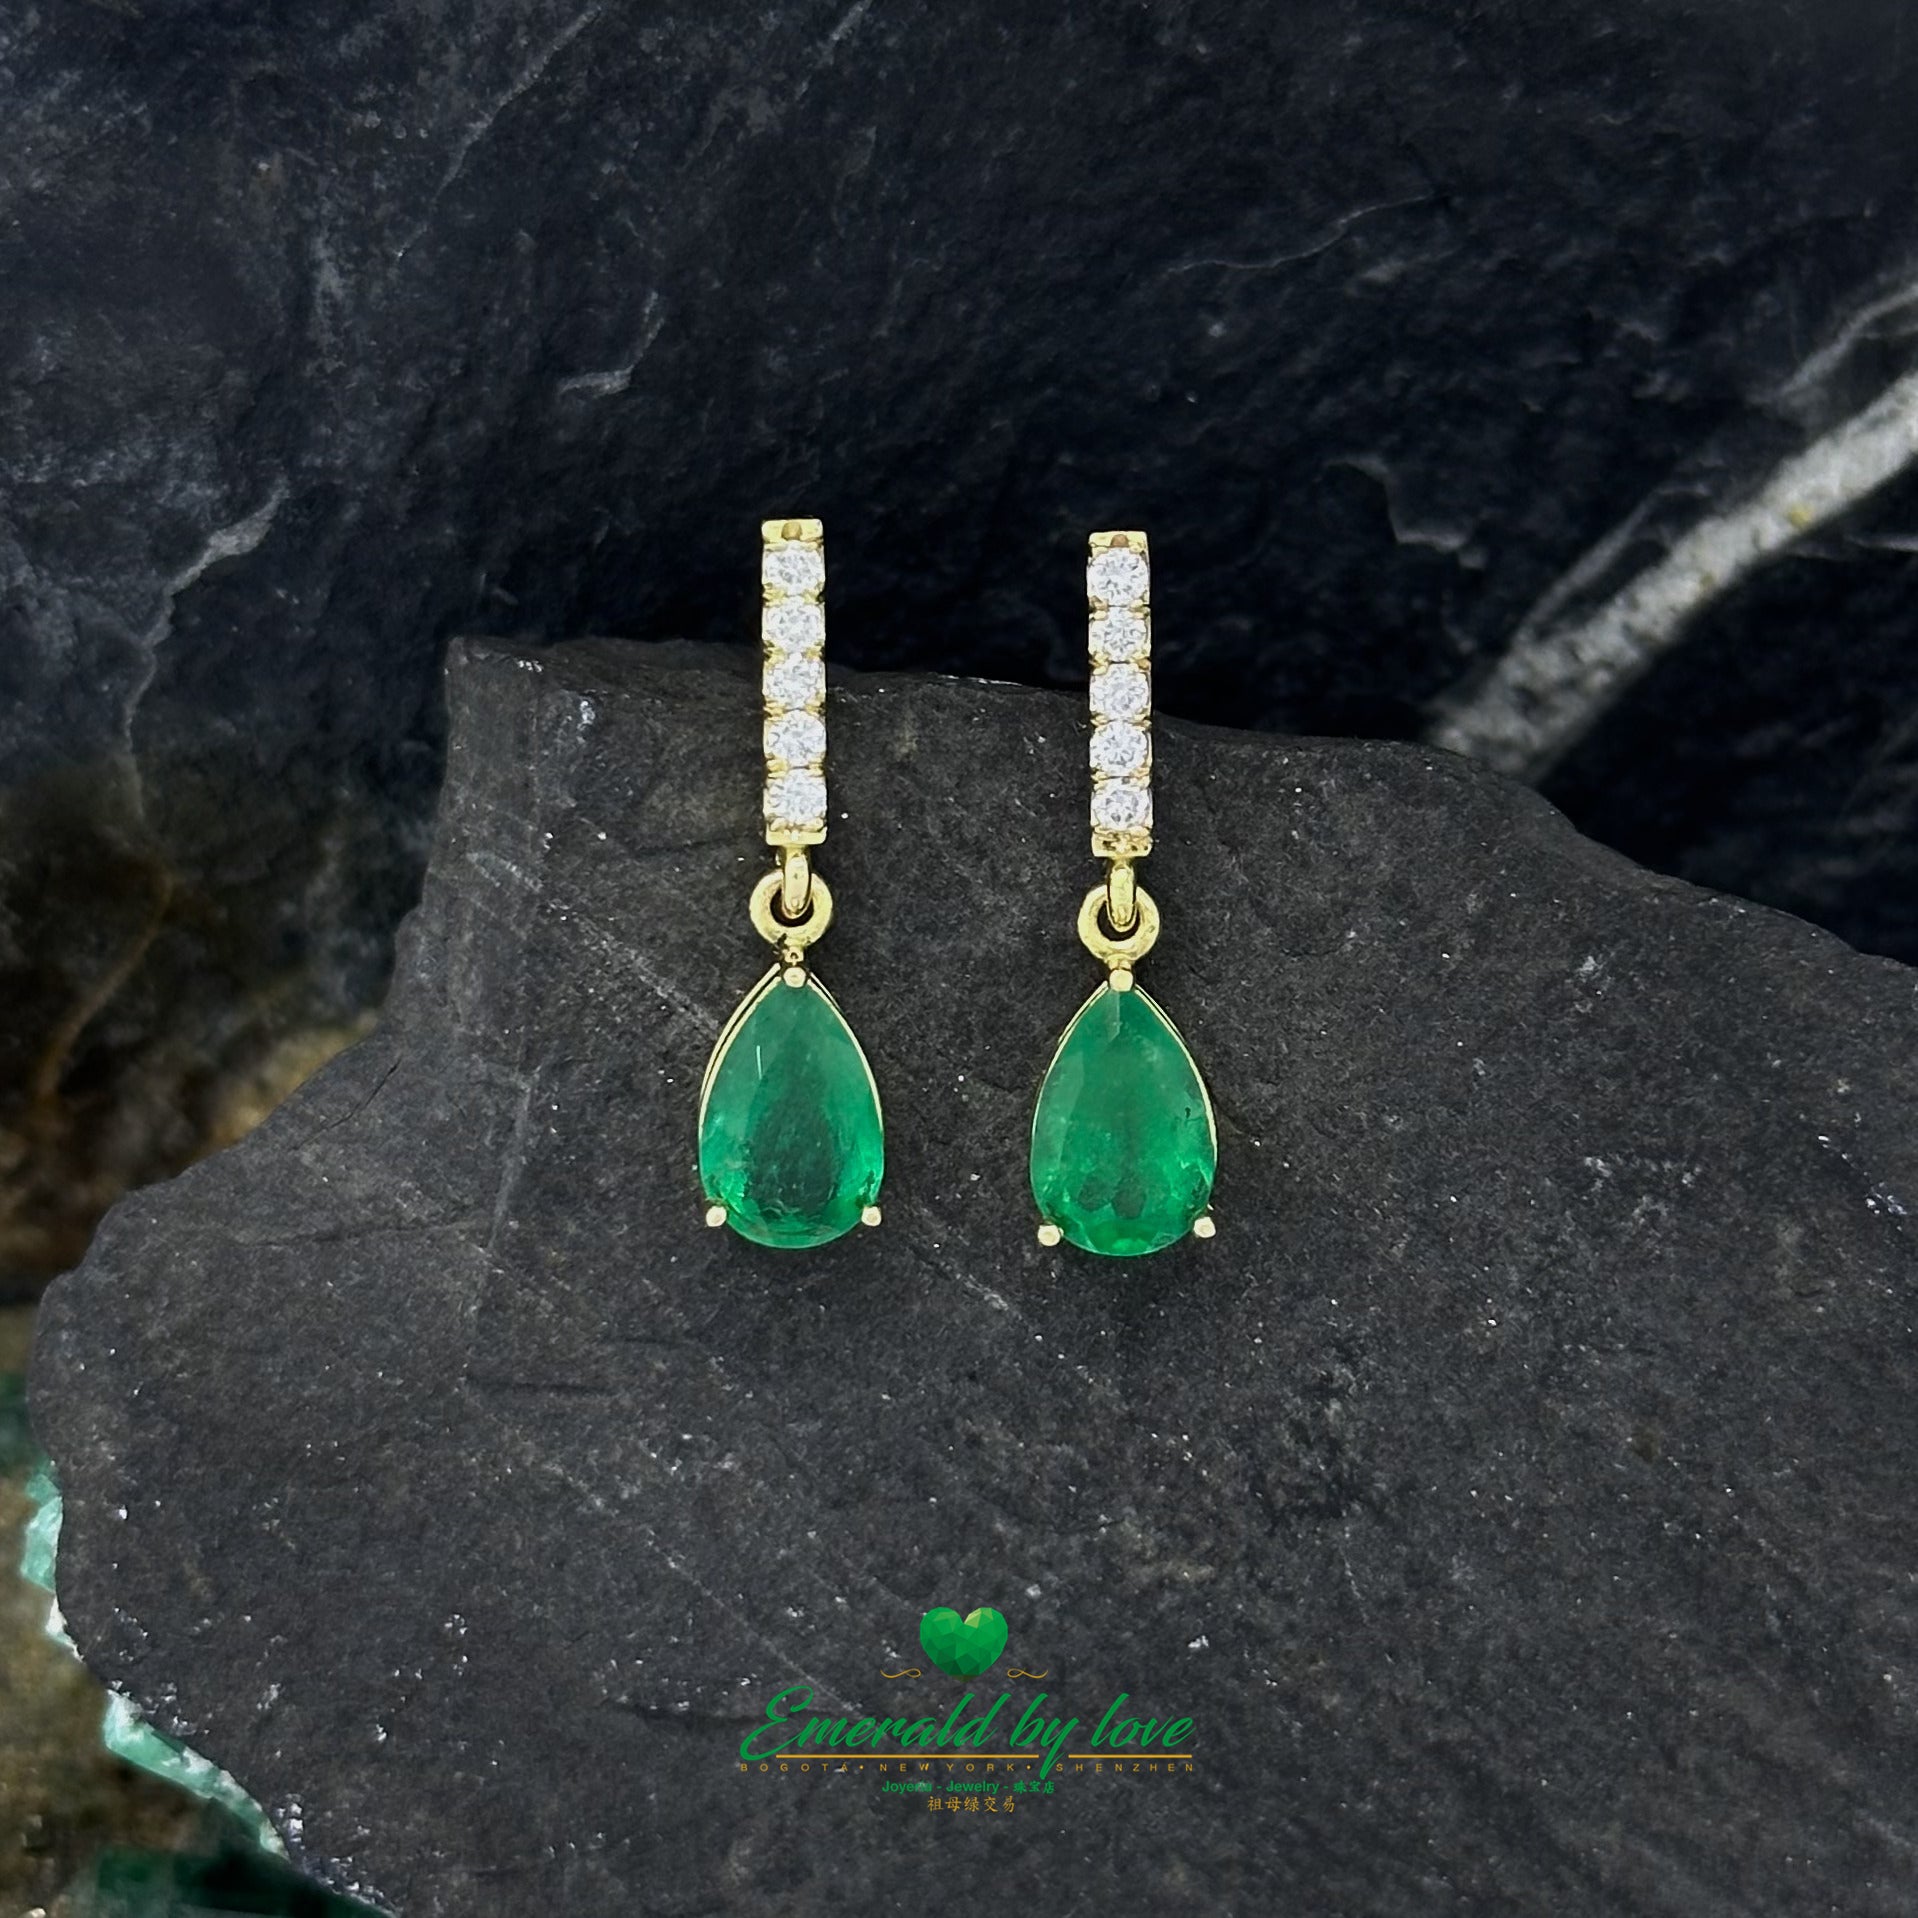 Elongated Yellow Gold Earrings Adorned with Diamond and Emerald Teardrop Accents